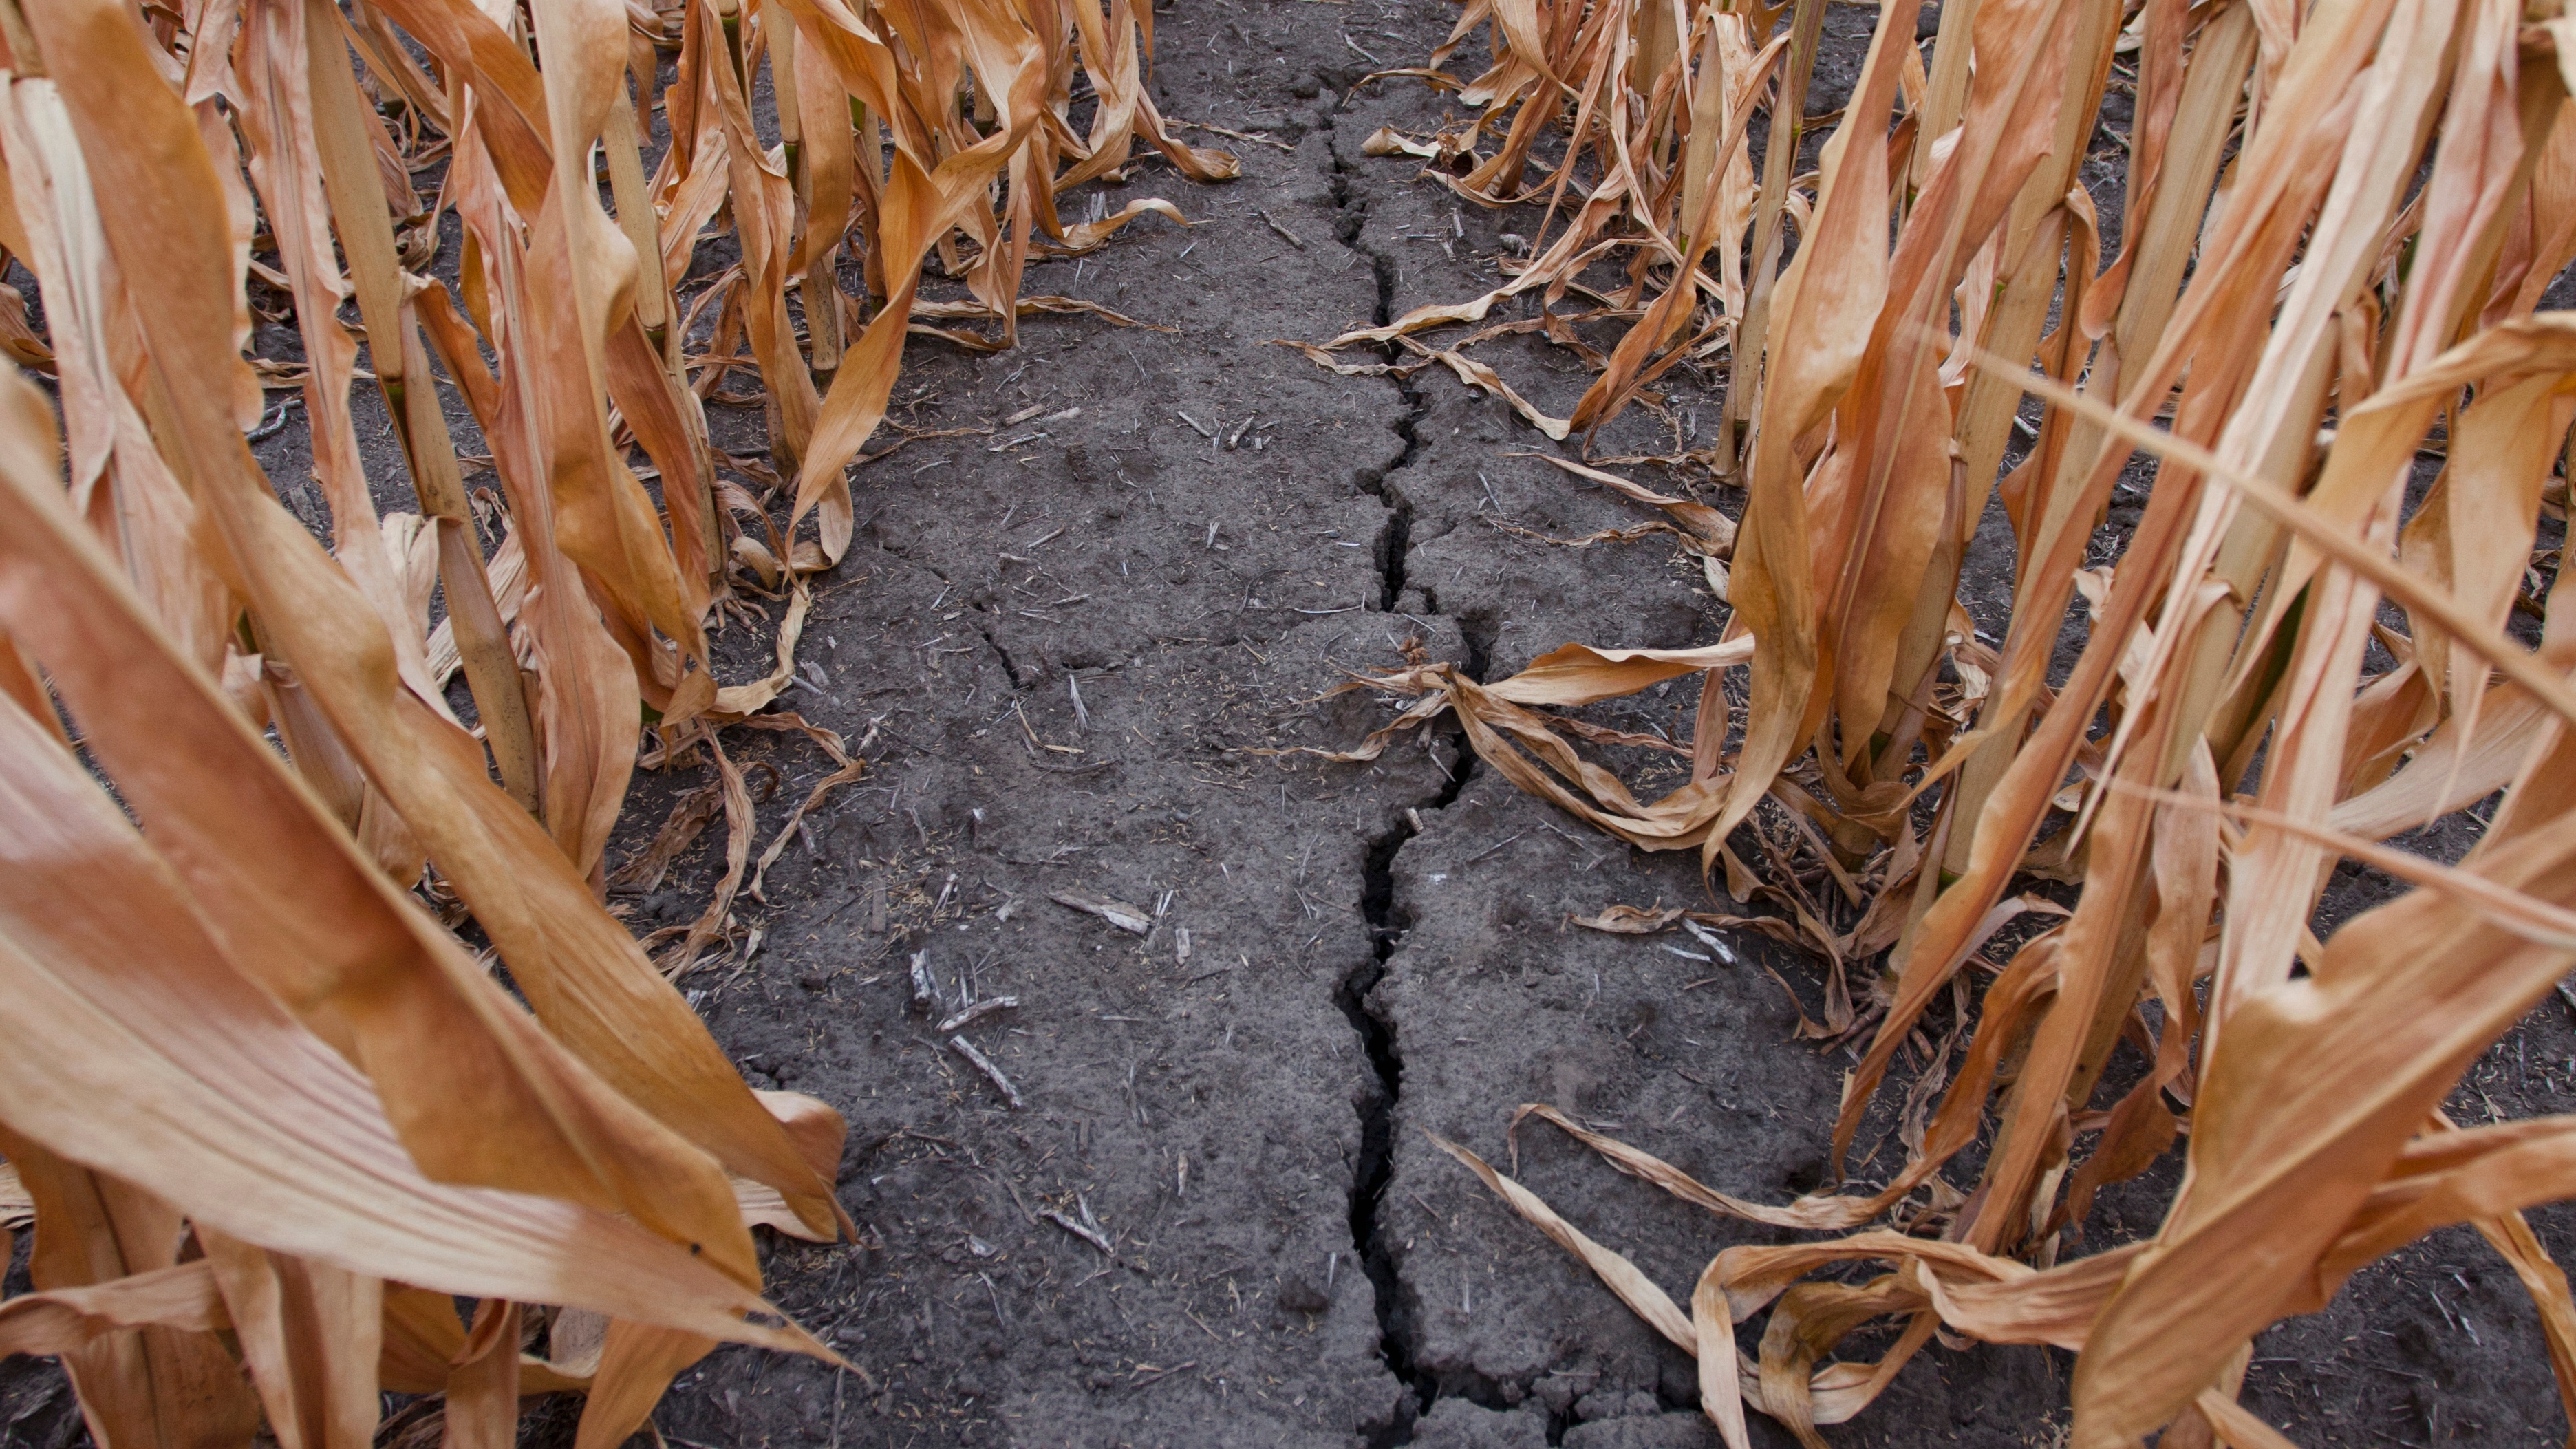 Drought cracked corn field 